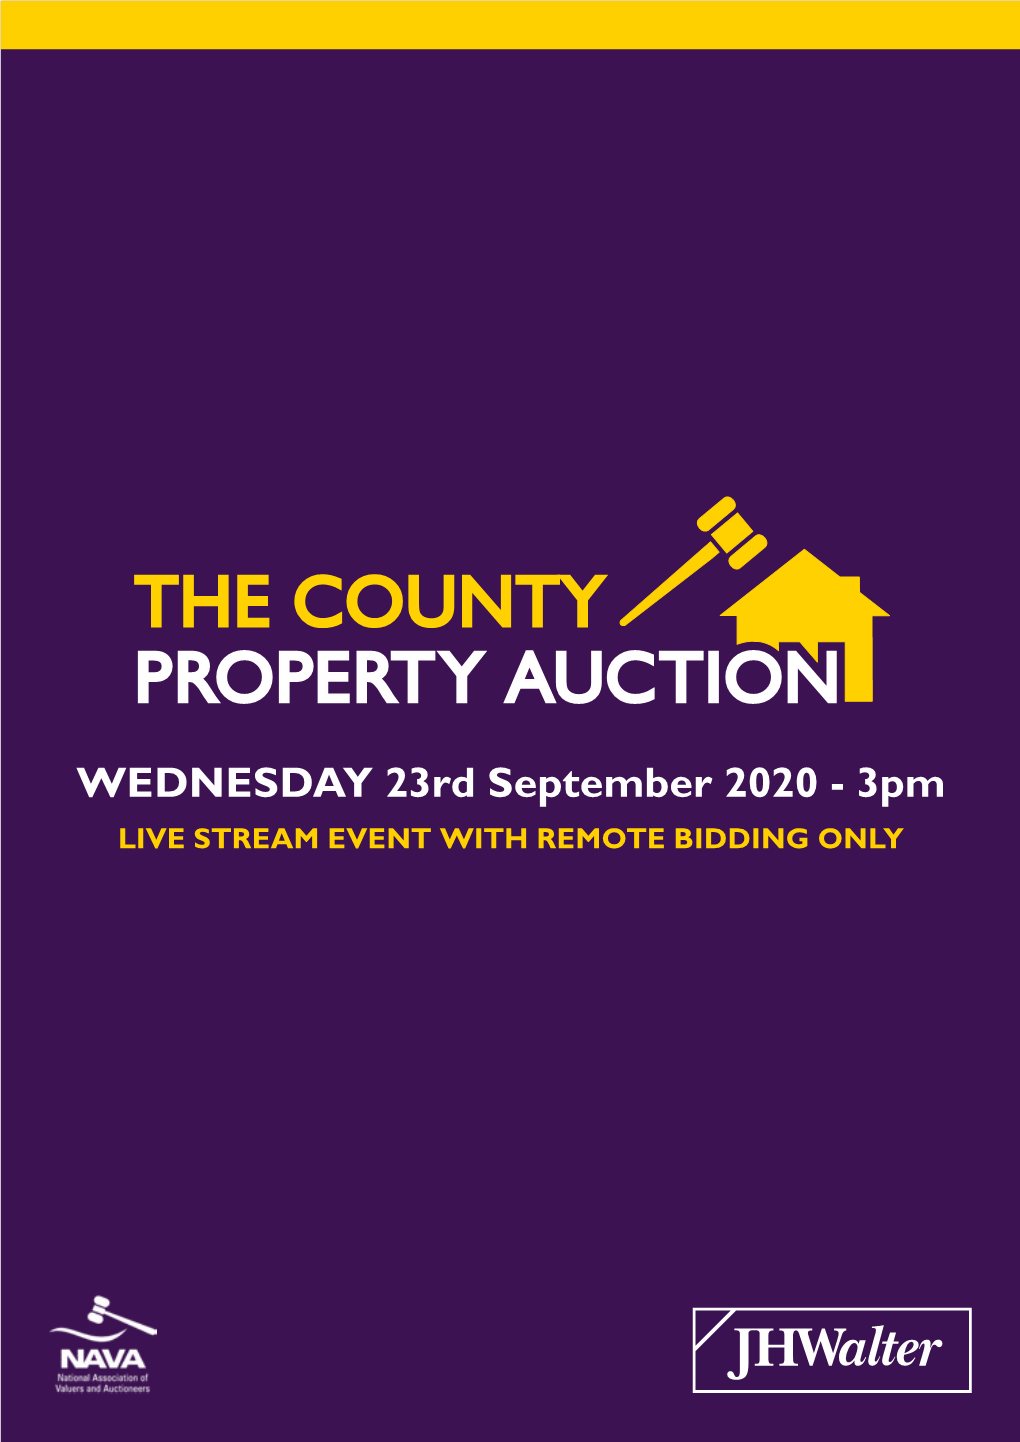 WEDNESDAY 23Rd September 2020 - 3Pm LIVE STREAM EVENT with REMOTE BIDDING ONLY Buyers Guide